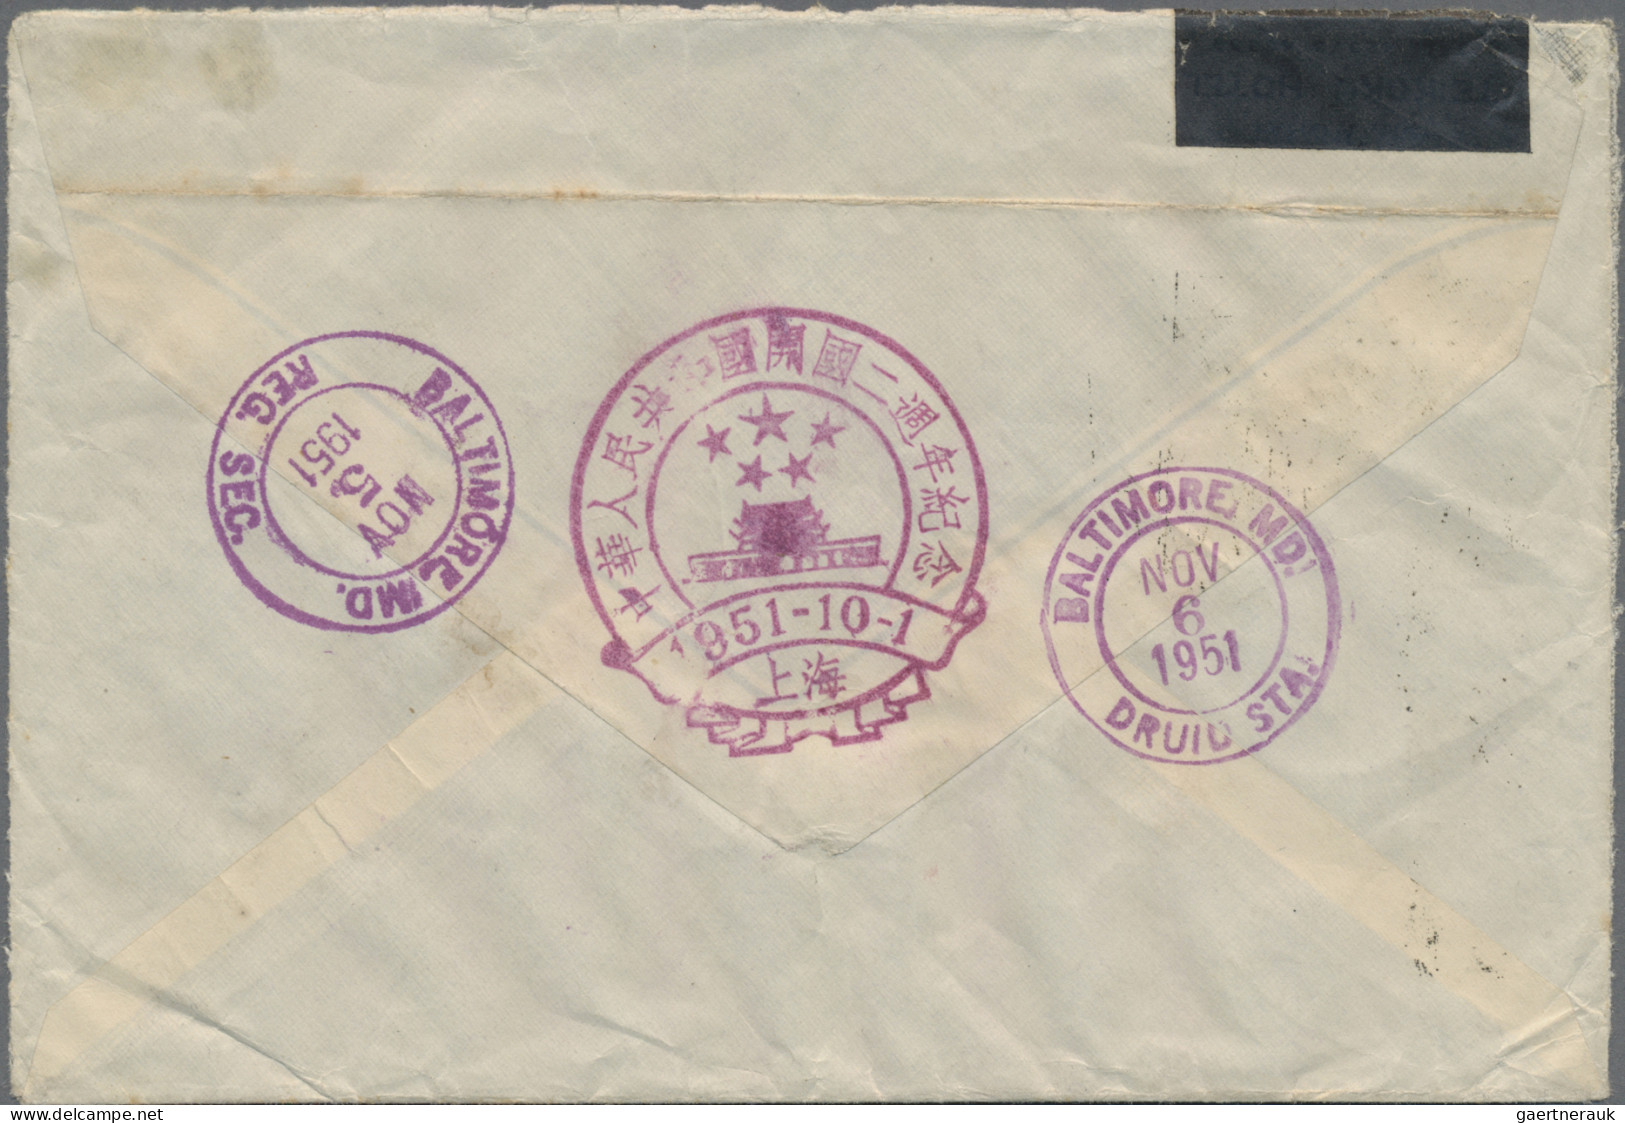 China (PRC): 1950/51, Registered Cover Addressed To Baltimore, The United States - Covers & Documents